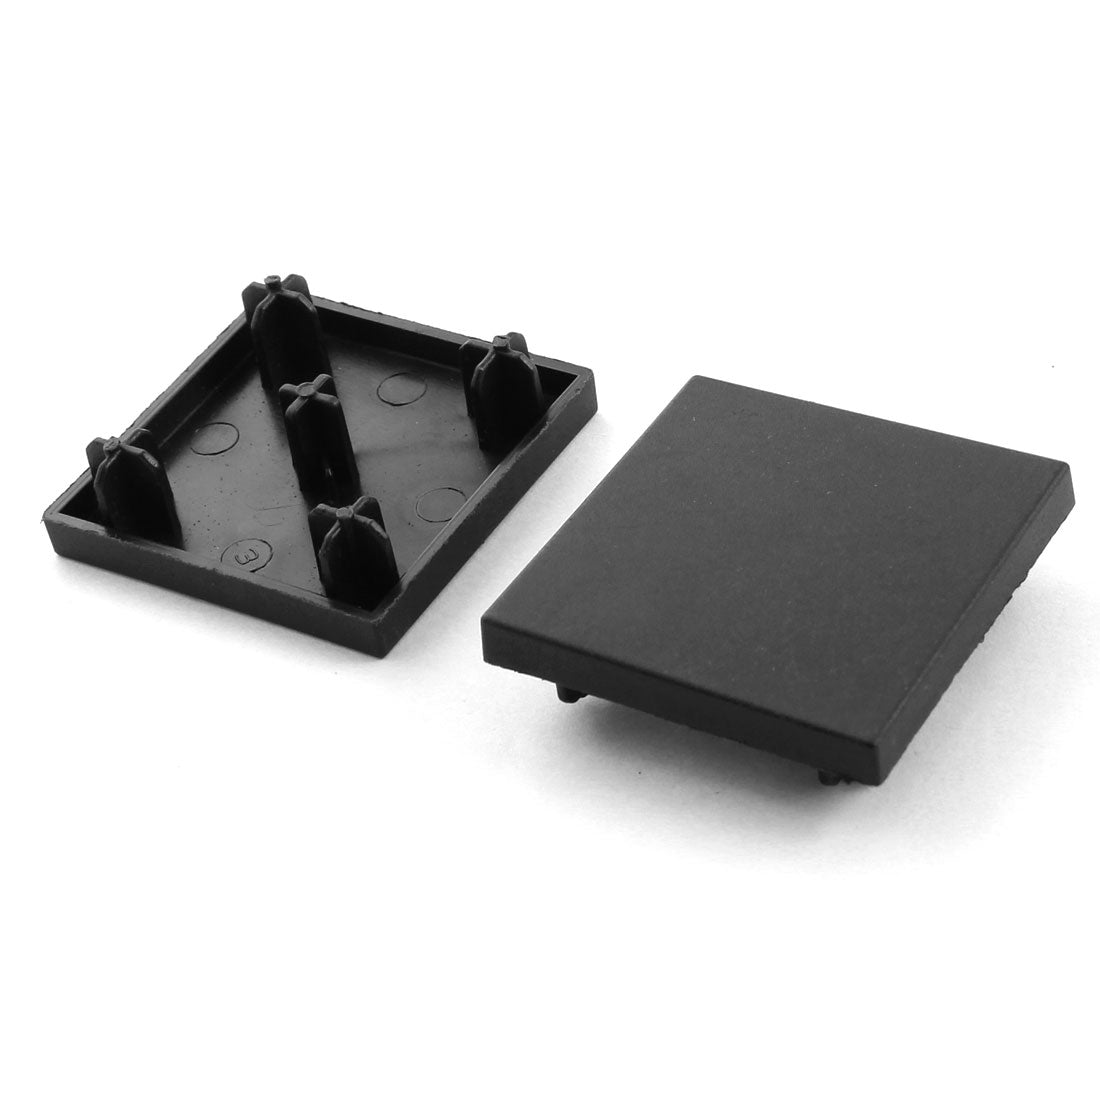 uxcell Uxcell 2Pcs 40mm x 40mm Square T-Slotted Aluminum Profile Extrusion End Cap Cover Black